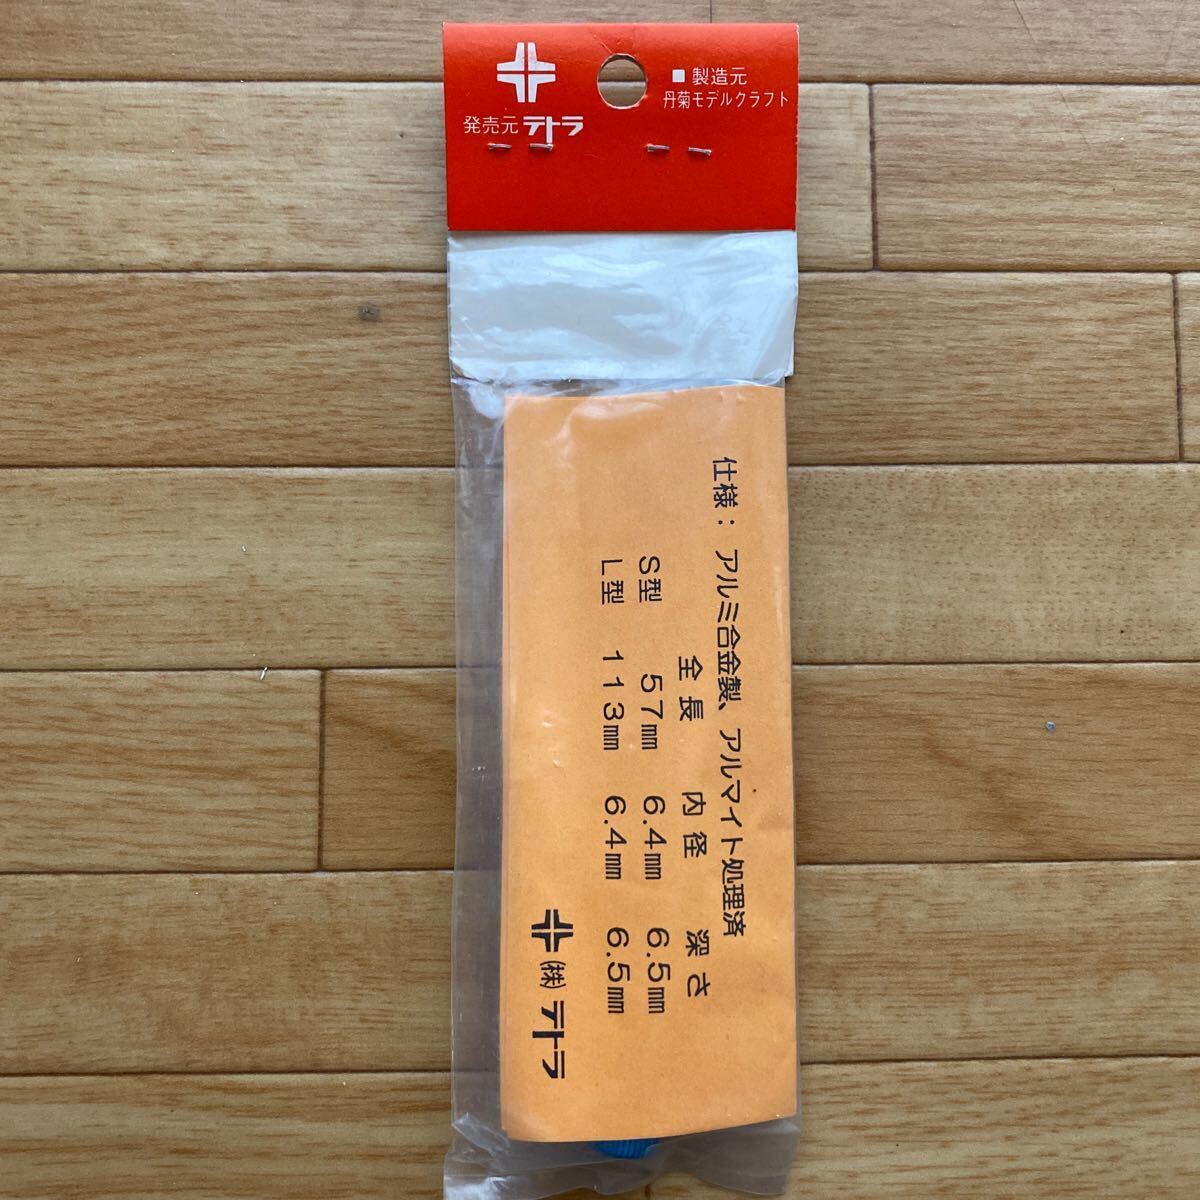  Tetra crevice Driver postage 180 jpy 